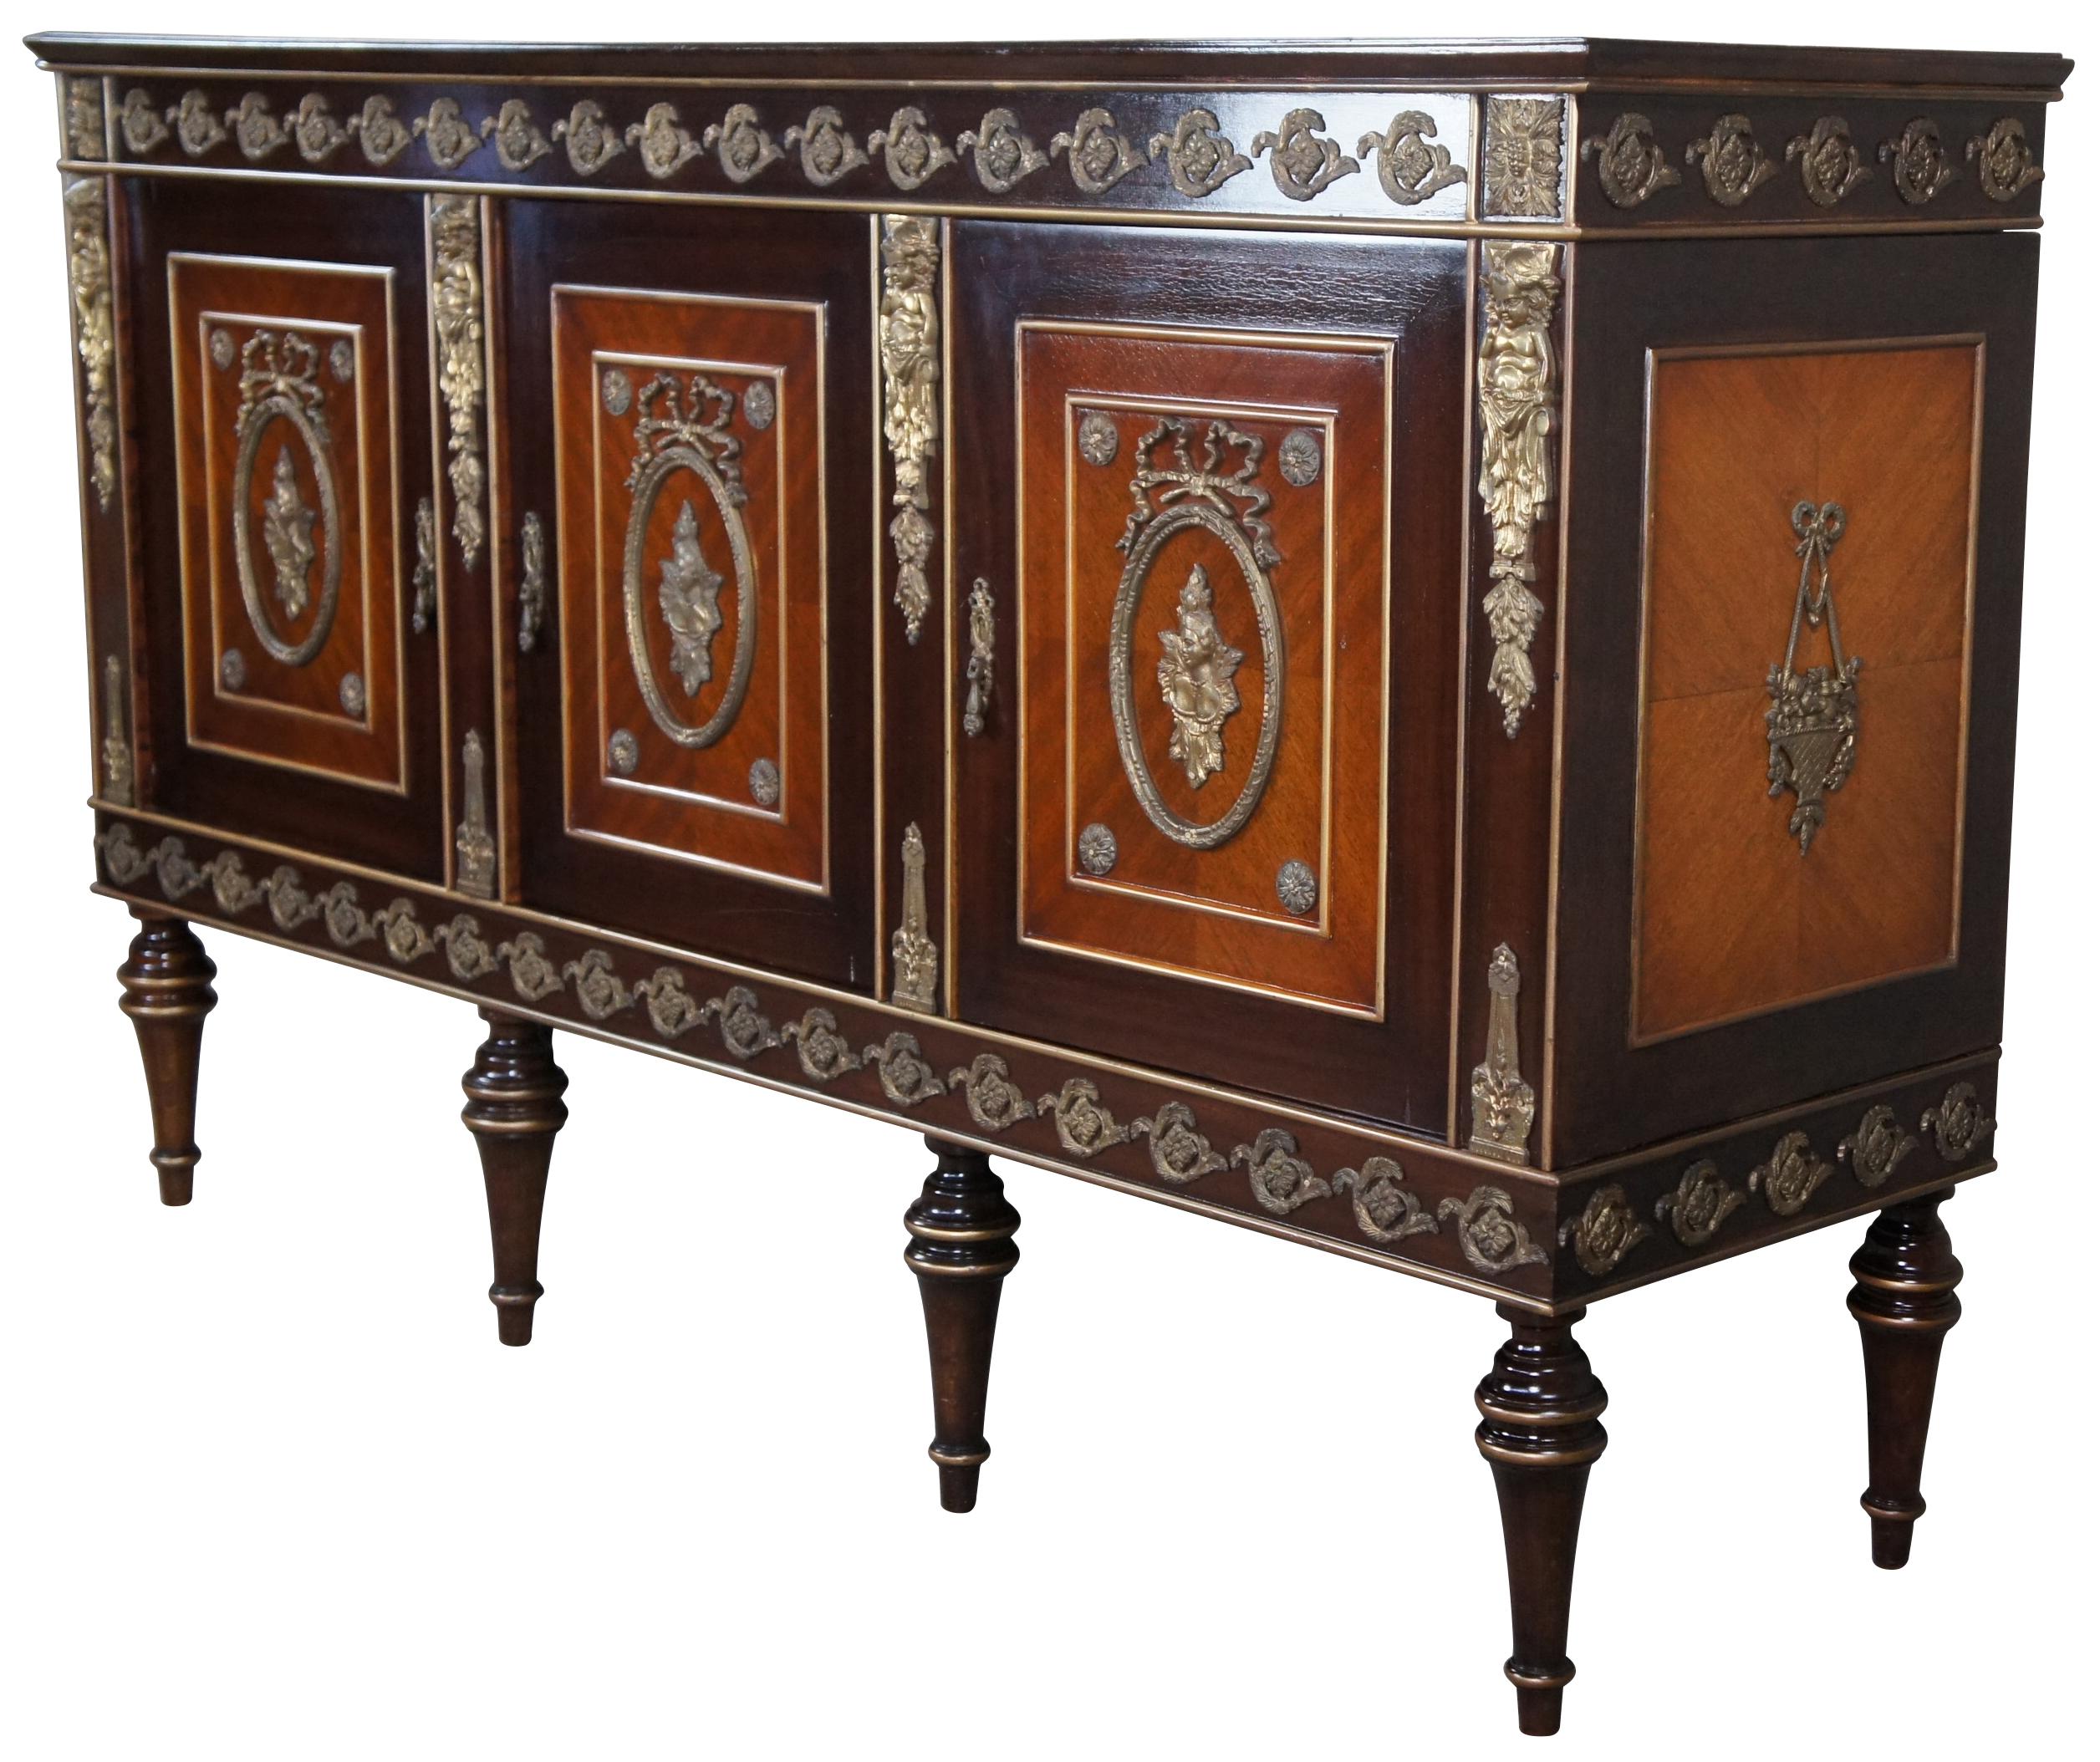 Vintage French Louis XVI inspired buffet, sideboard server or bar cabinet. Made in Cairo Egypt (Arabska Republika Egiptu) by Abbas, circa 1972. Made of mahogany with two tones and elegant matchbook veneer. Features ornate brass medallions, ormolu